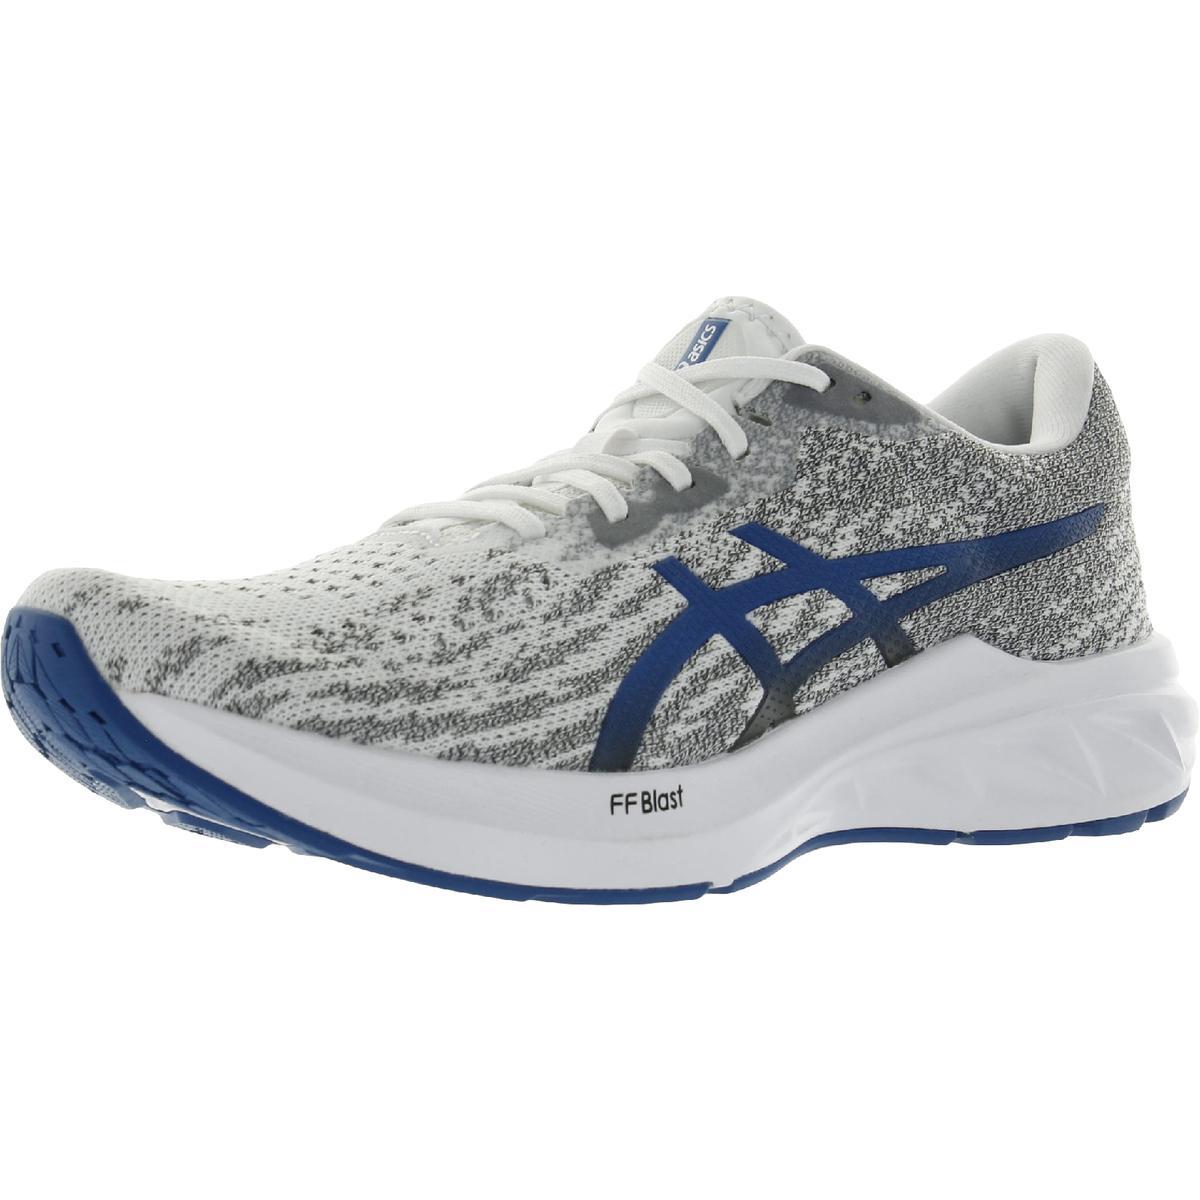 Asics Mens Dynablast 2 Lace up Athletic and Training Shoes Sneakers Bhfo 9859 White/Lake Drive